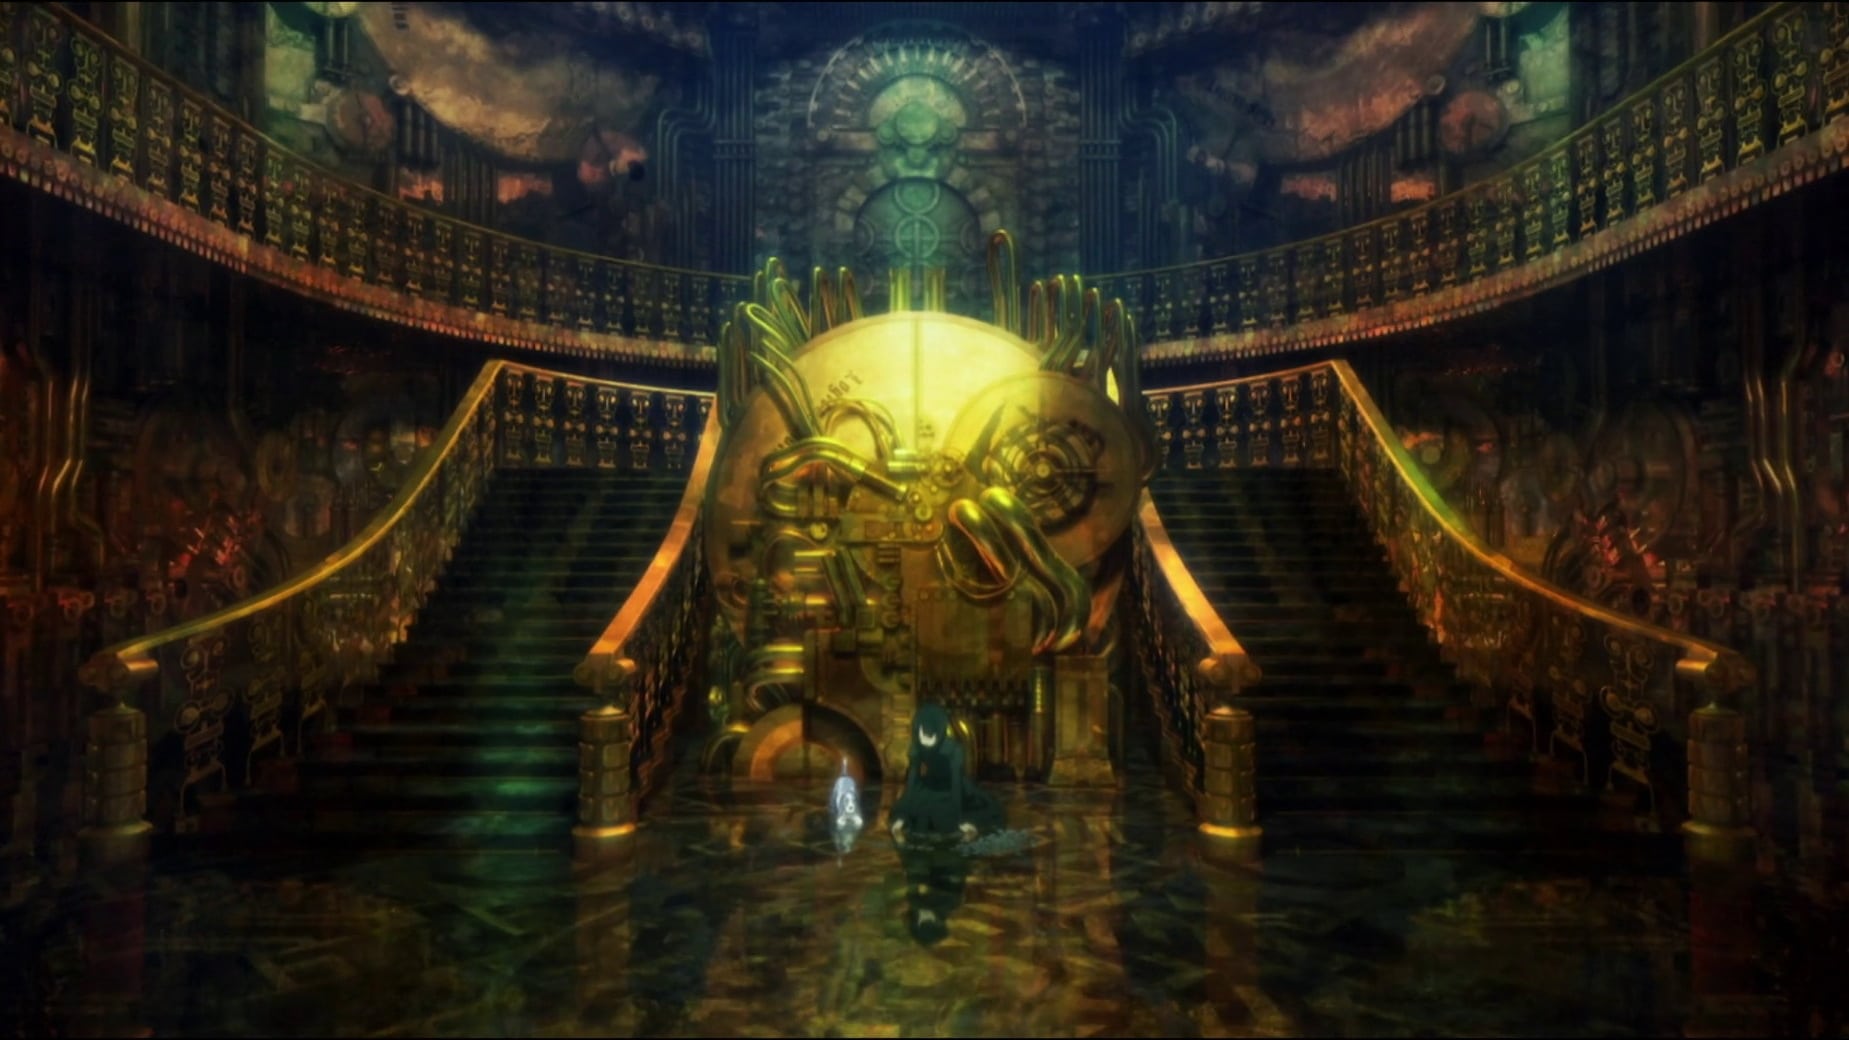 The interior of the Locus Solus mansion in Ghost in the Shell 2: Innocence (2004)